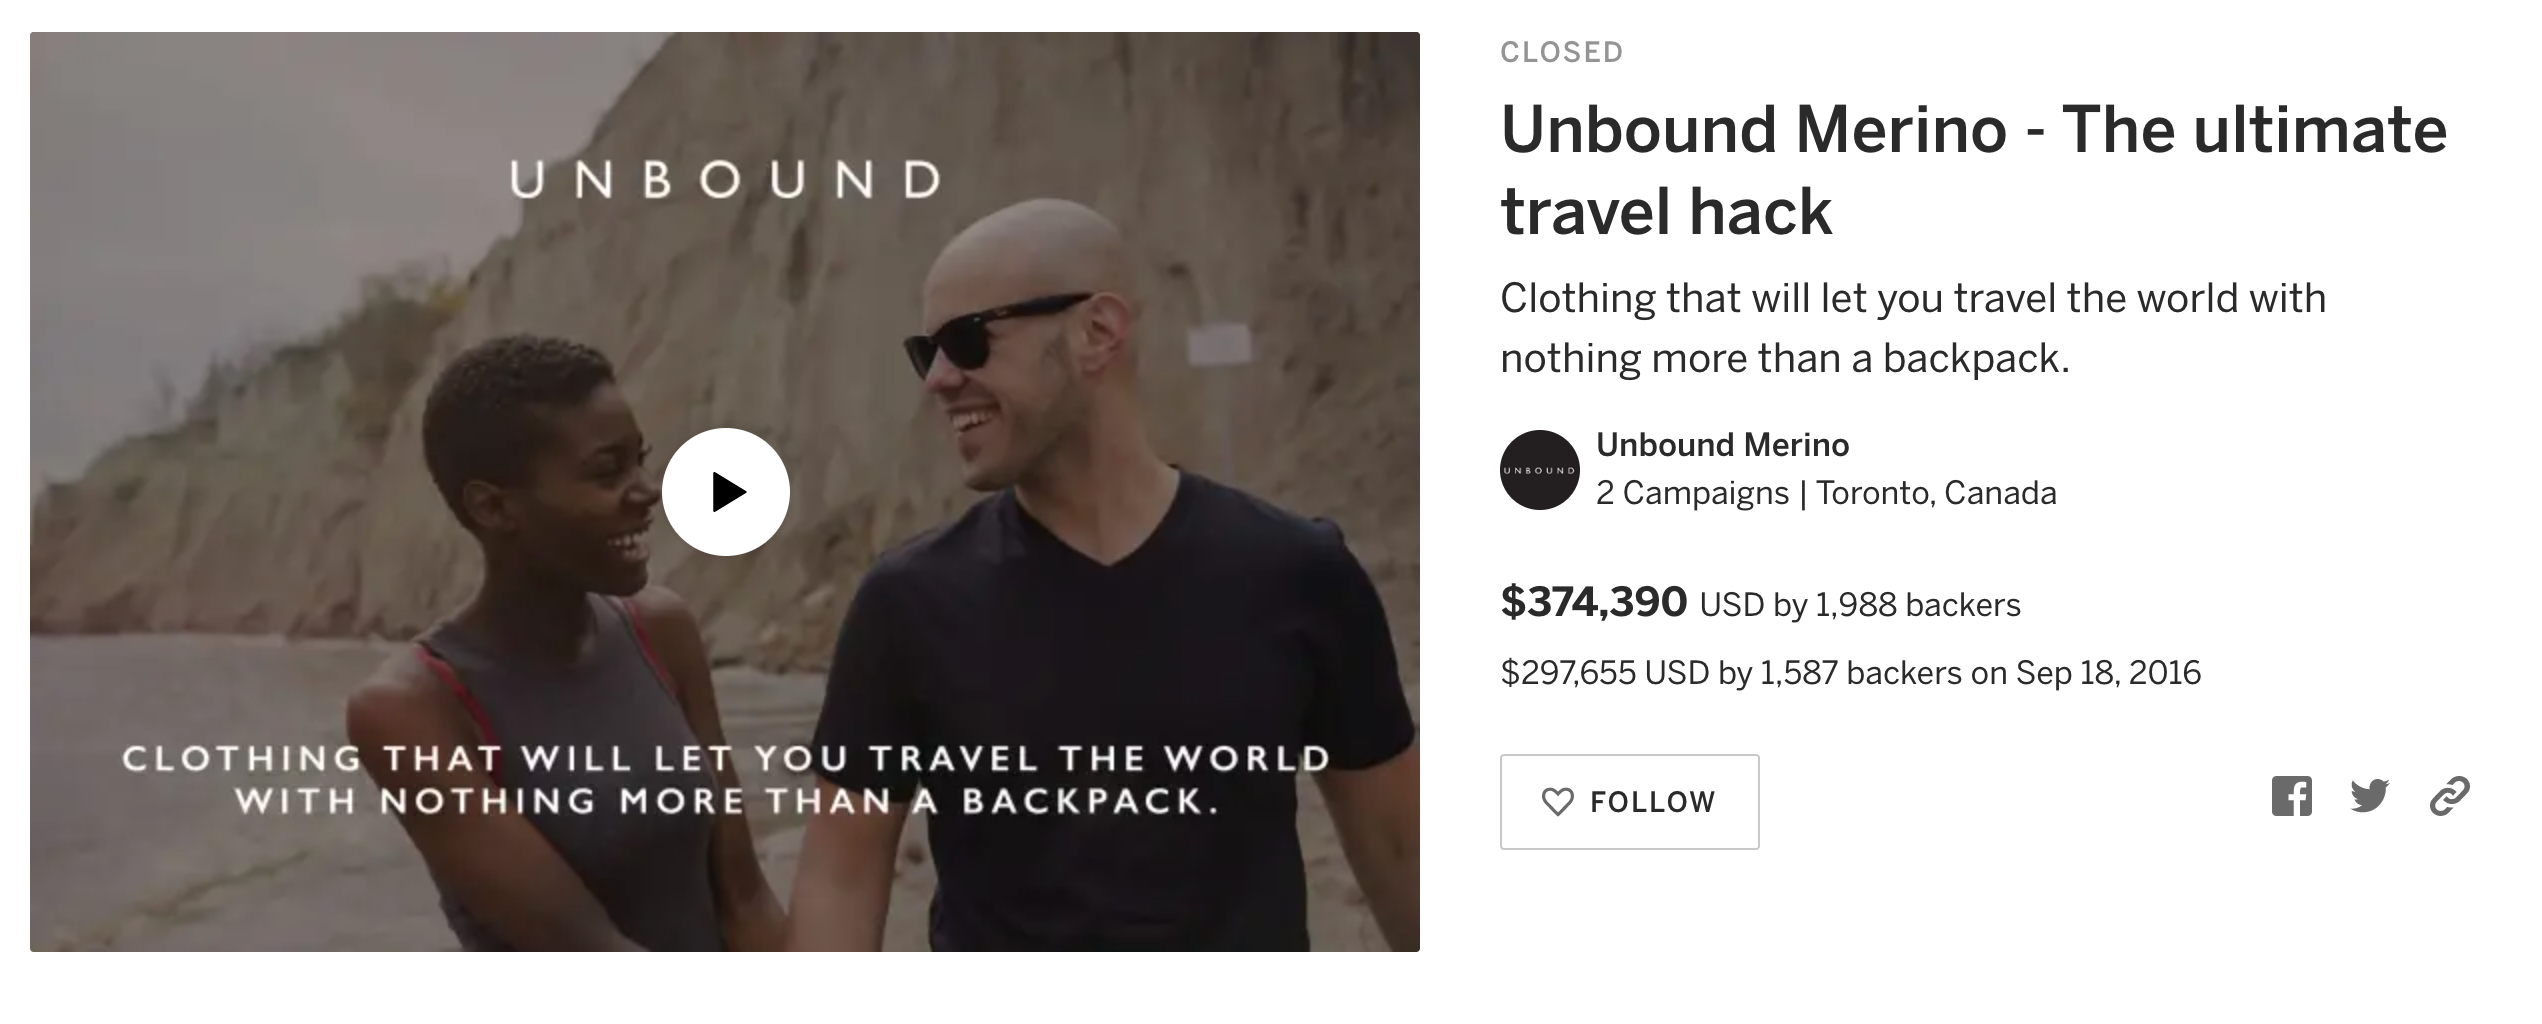 EP #310 The Formula for a $374,390 Indiegogo with Unbound Merino